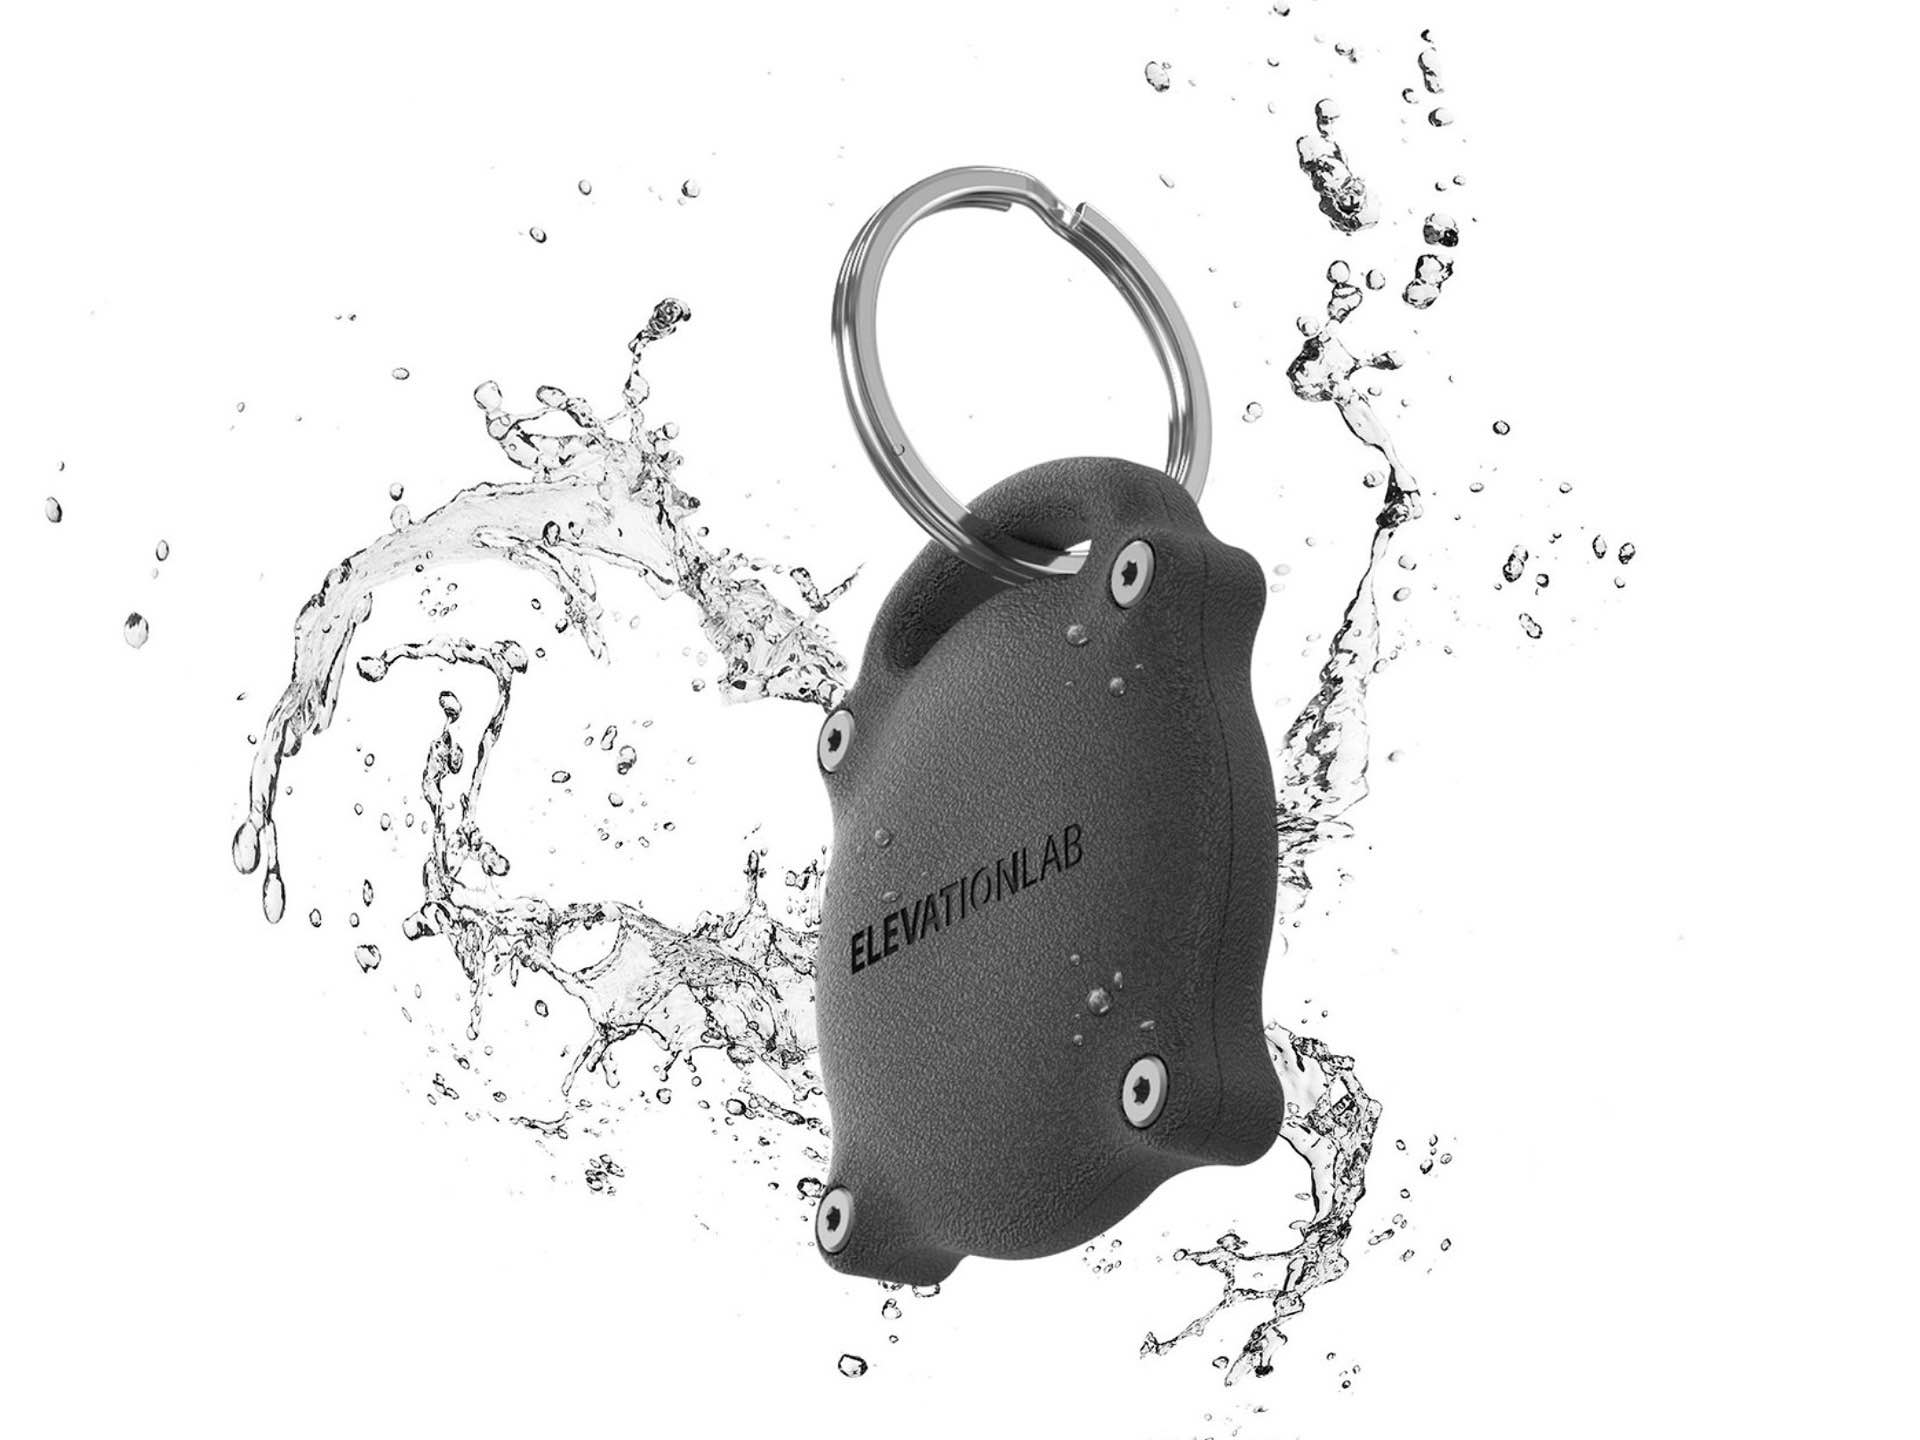 elevationlab-tagvault-waterproof-keychain-case-for-apple-airtag